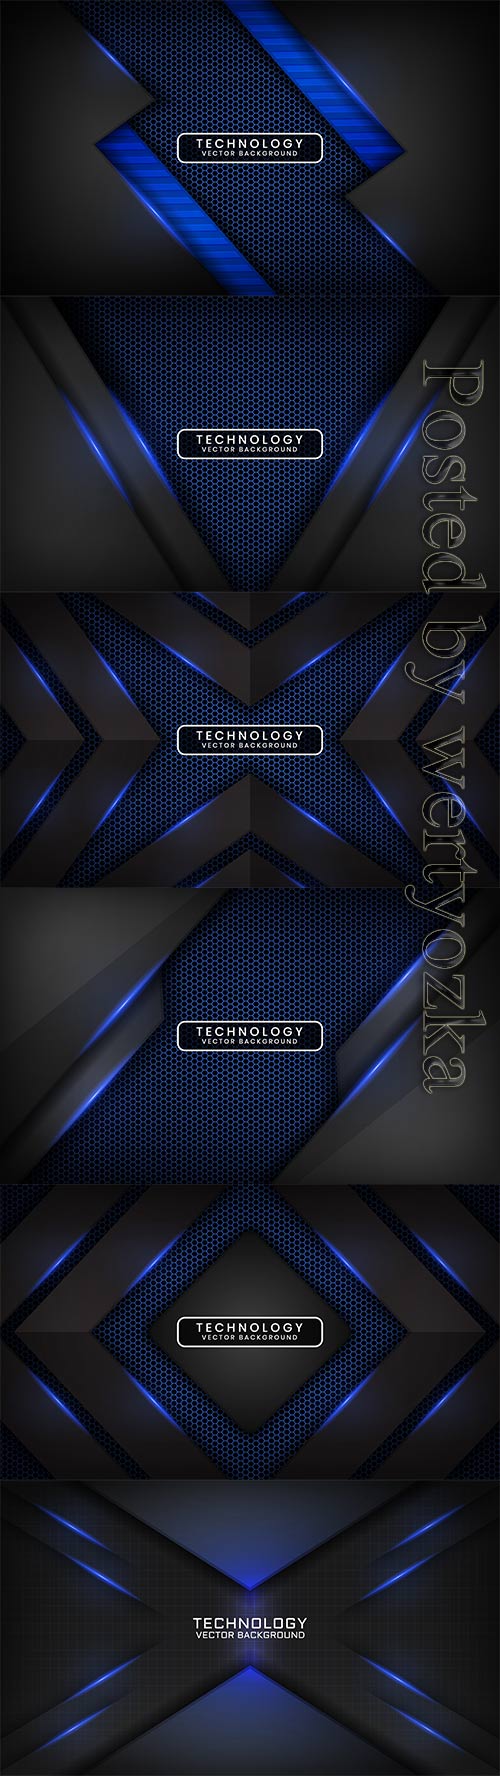 Abstract 3d dark and blue technology vector background